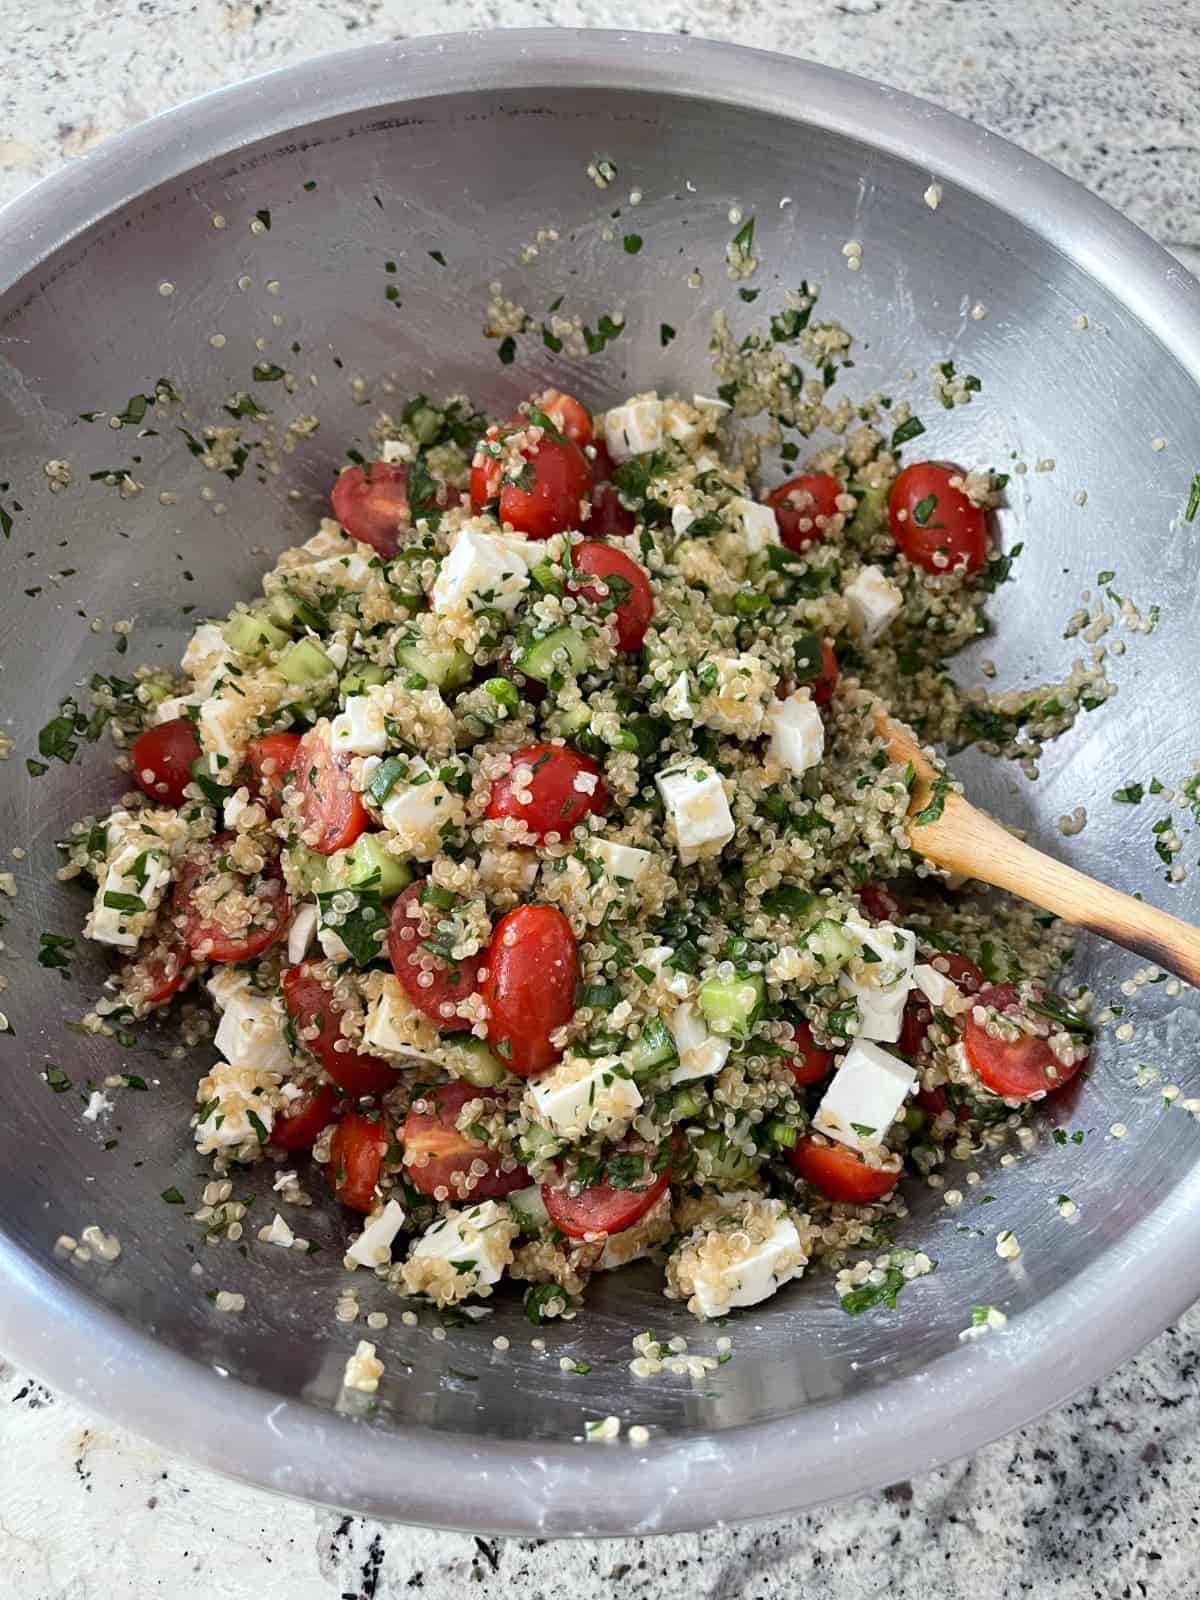 Mixing quinoa tabbouleh with fat-free feta cheese in bowl with wooden spoon.